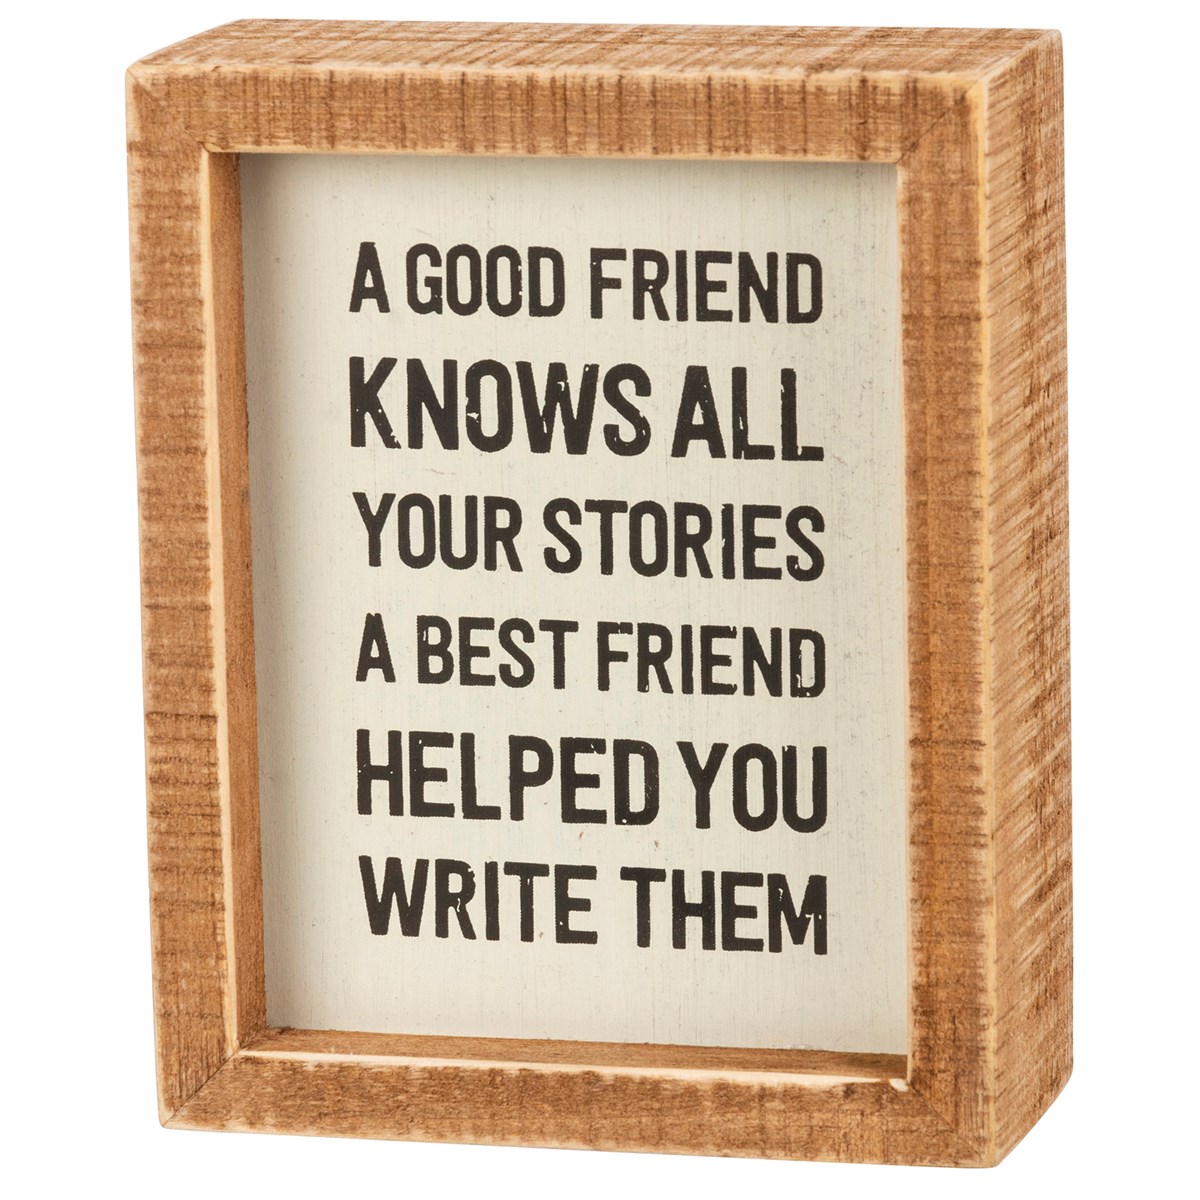 A Good Friend Knows Your Stories Inset Box Sign - Wood